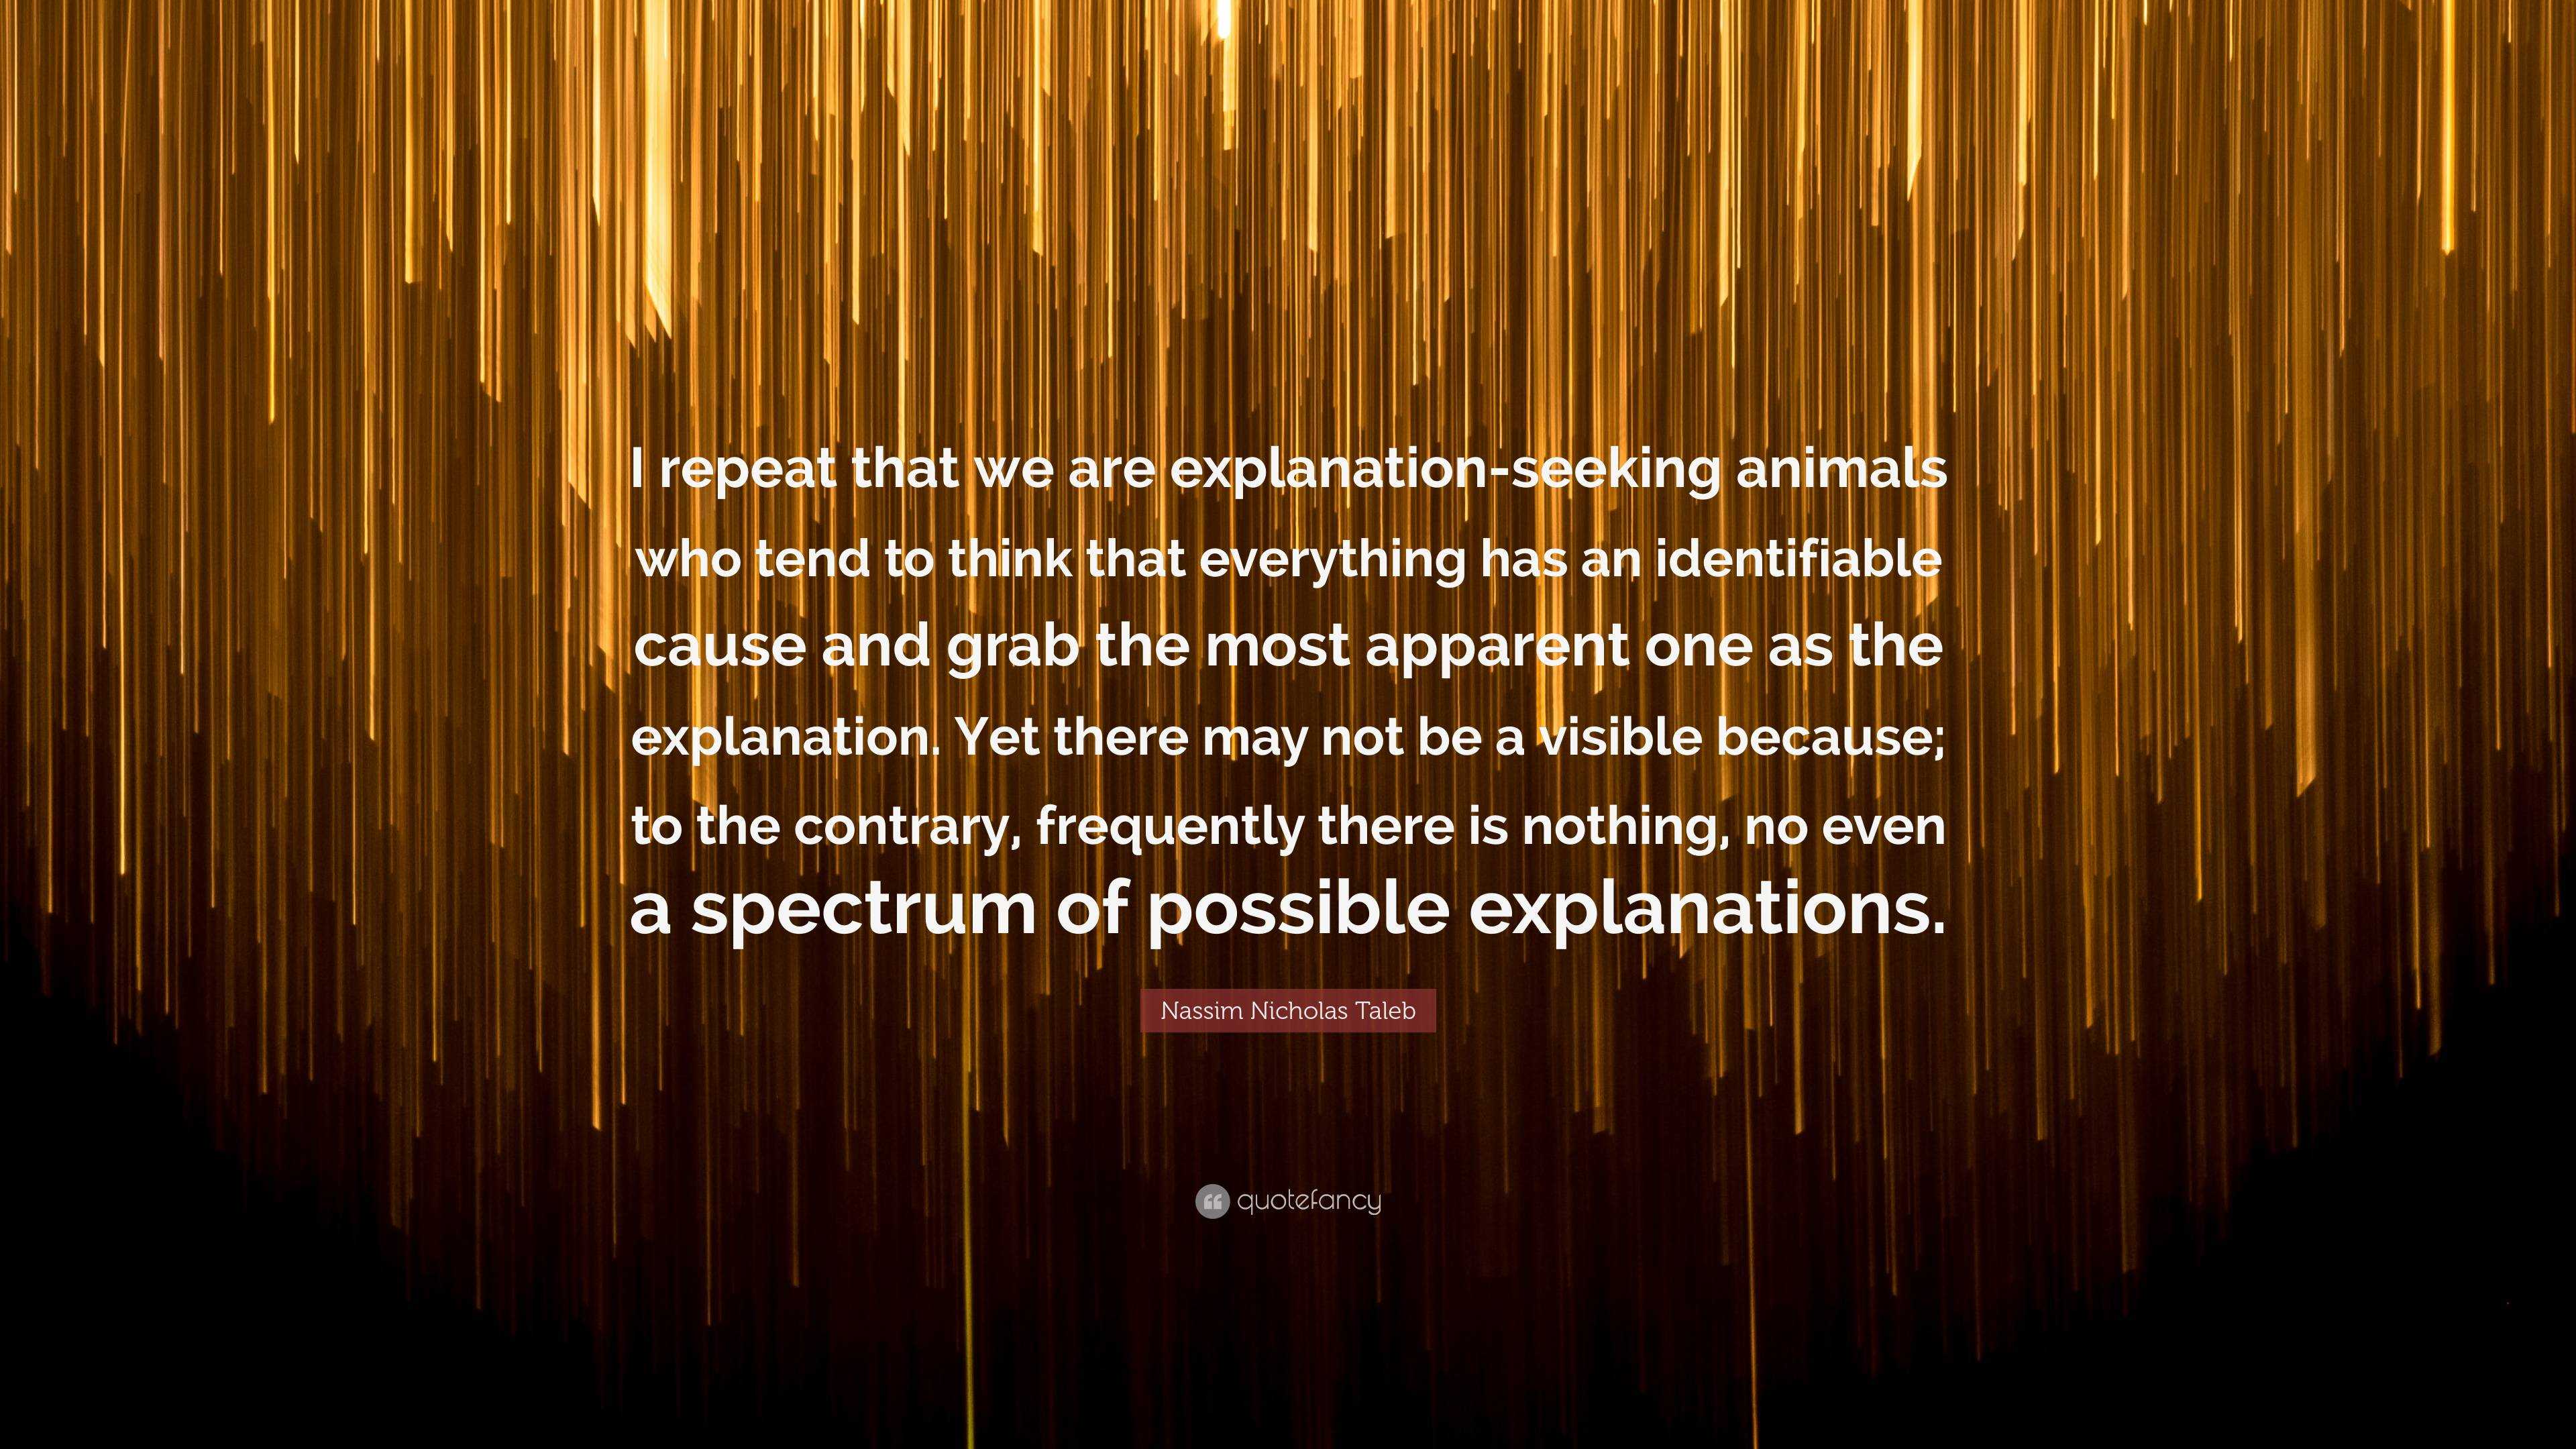 Nassim Nicholas Taleb Quote: “I repeat that we are explanation-seeking  animals who tend to think that everything has an identifiable cause and  grab th...”